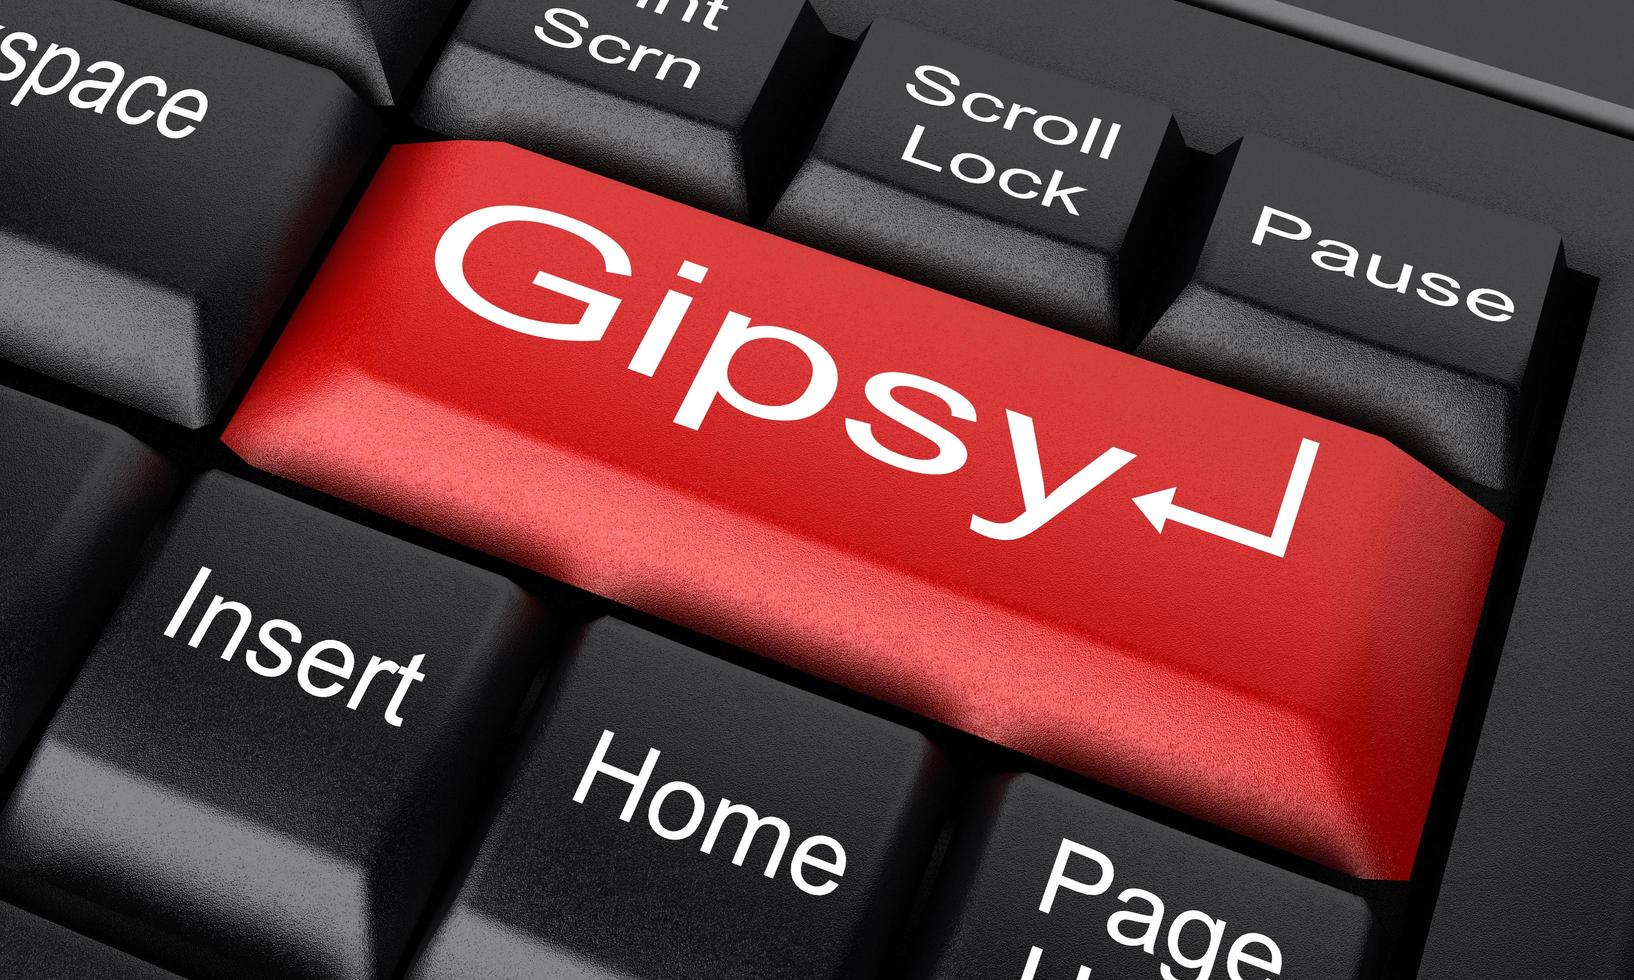 Gipsy word on red keyboard button photo